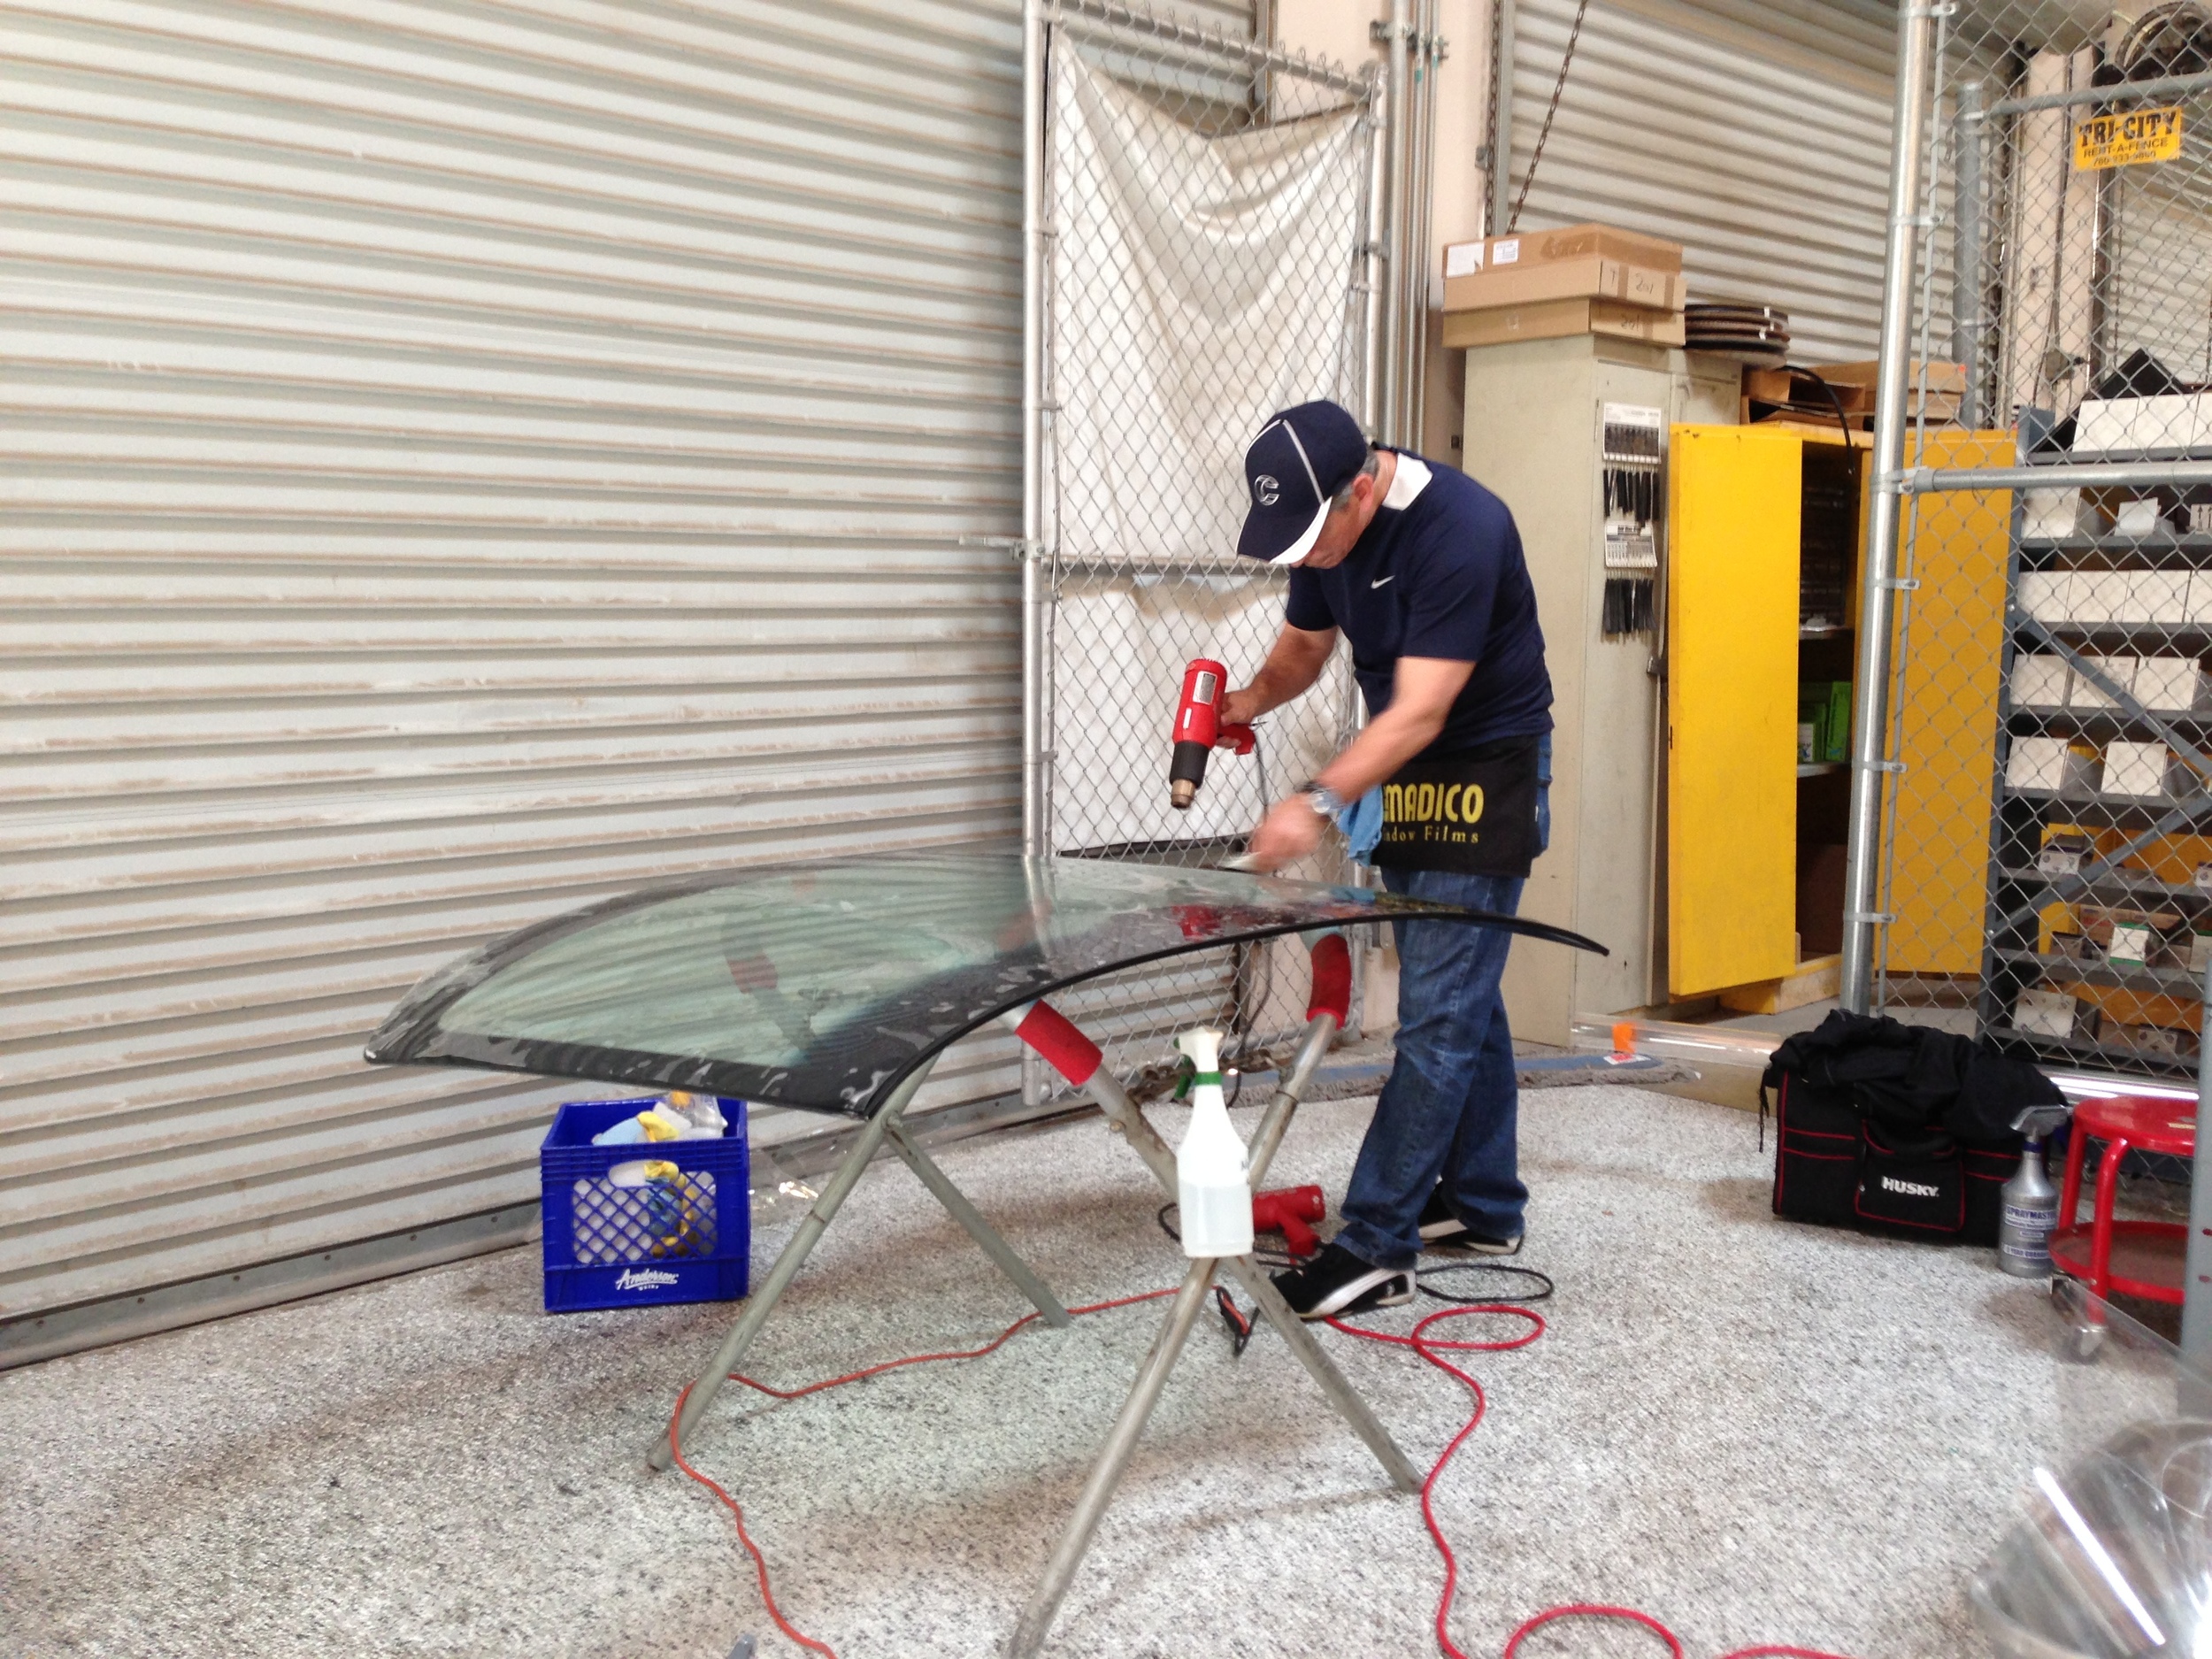 Paint Protection Film  Sun Diego Wraps - Vehicle Wrap, Clear Bra,  Commercial Printing